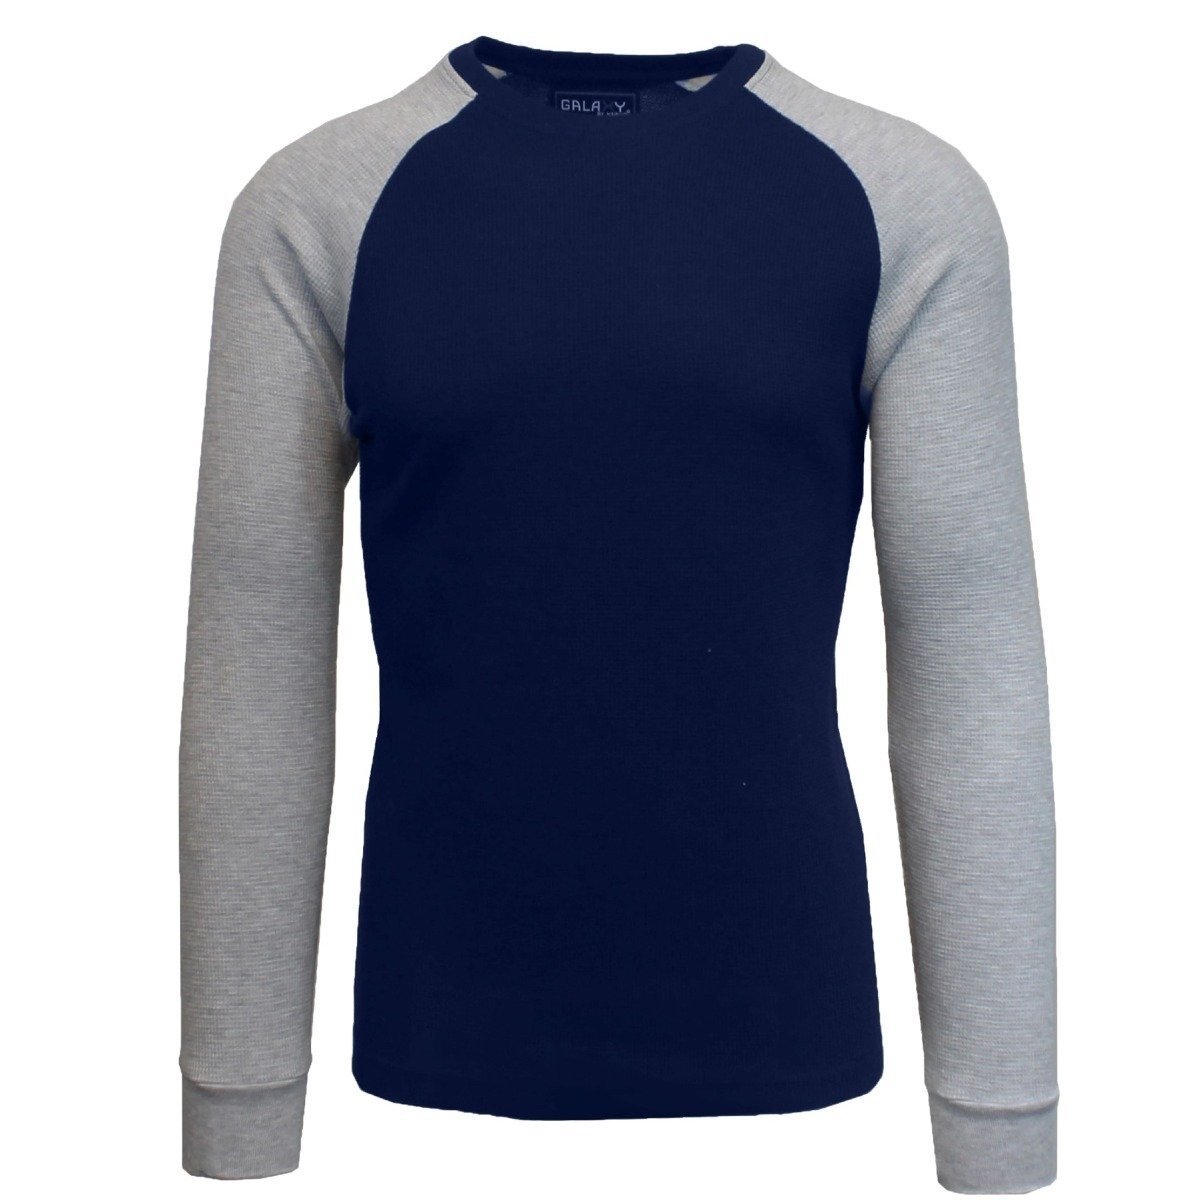 Galaxy by Harvic Men&#39;s Raglan Thermal Shirt - Assorted Sizes / Navy Blue/Heather Gray / Large